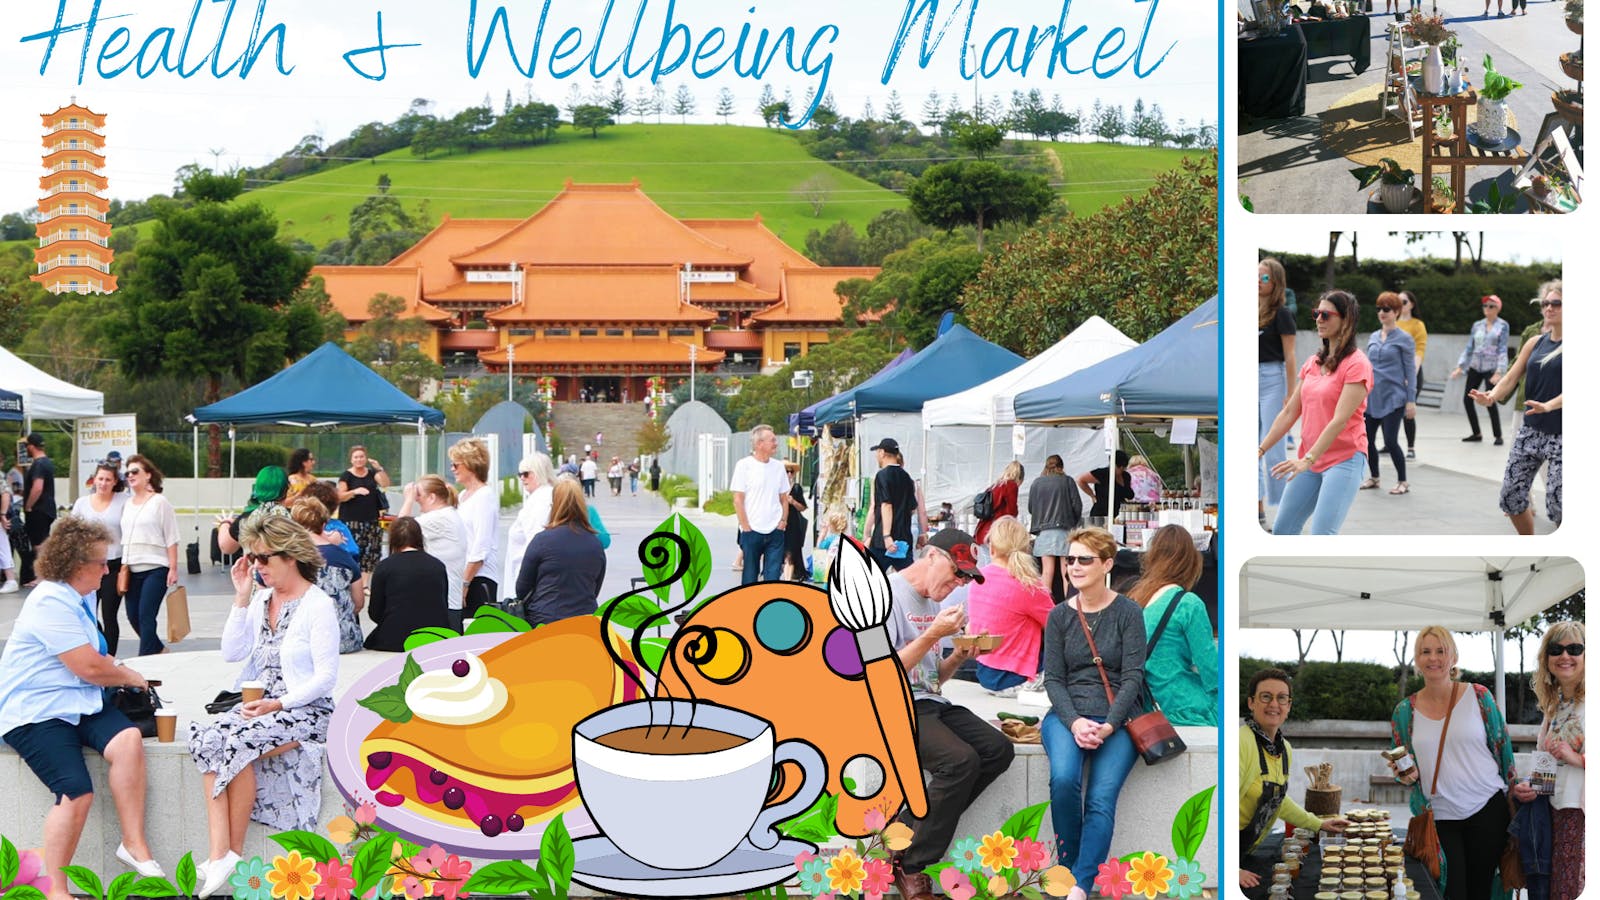 Image for Nan Tien Health and Wellbeing Market